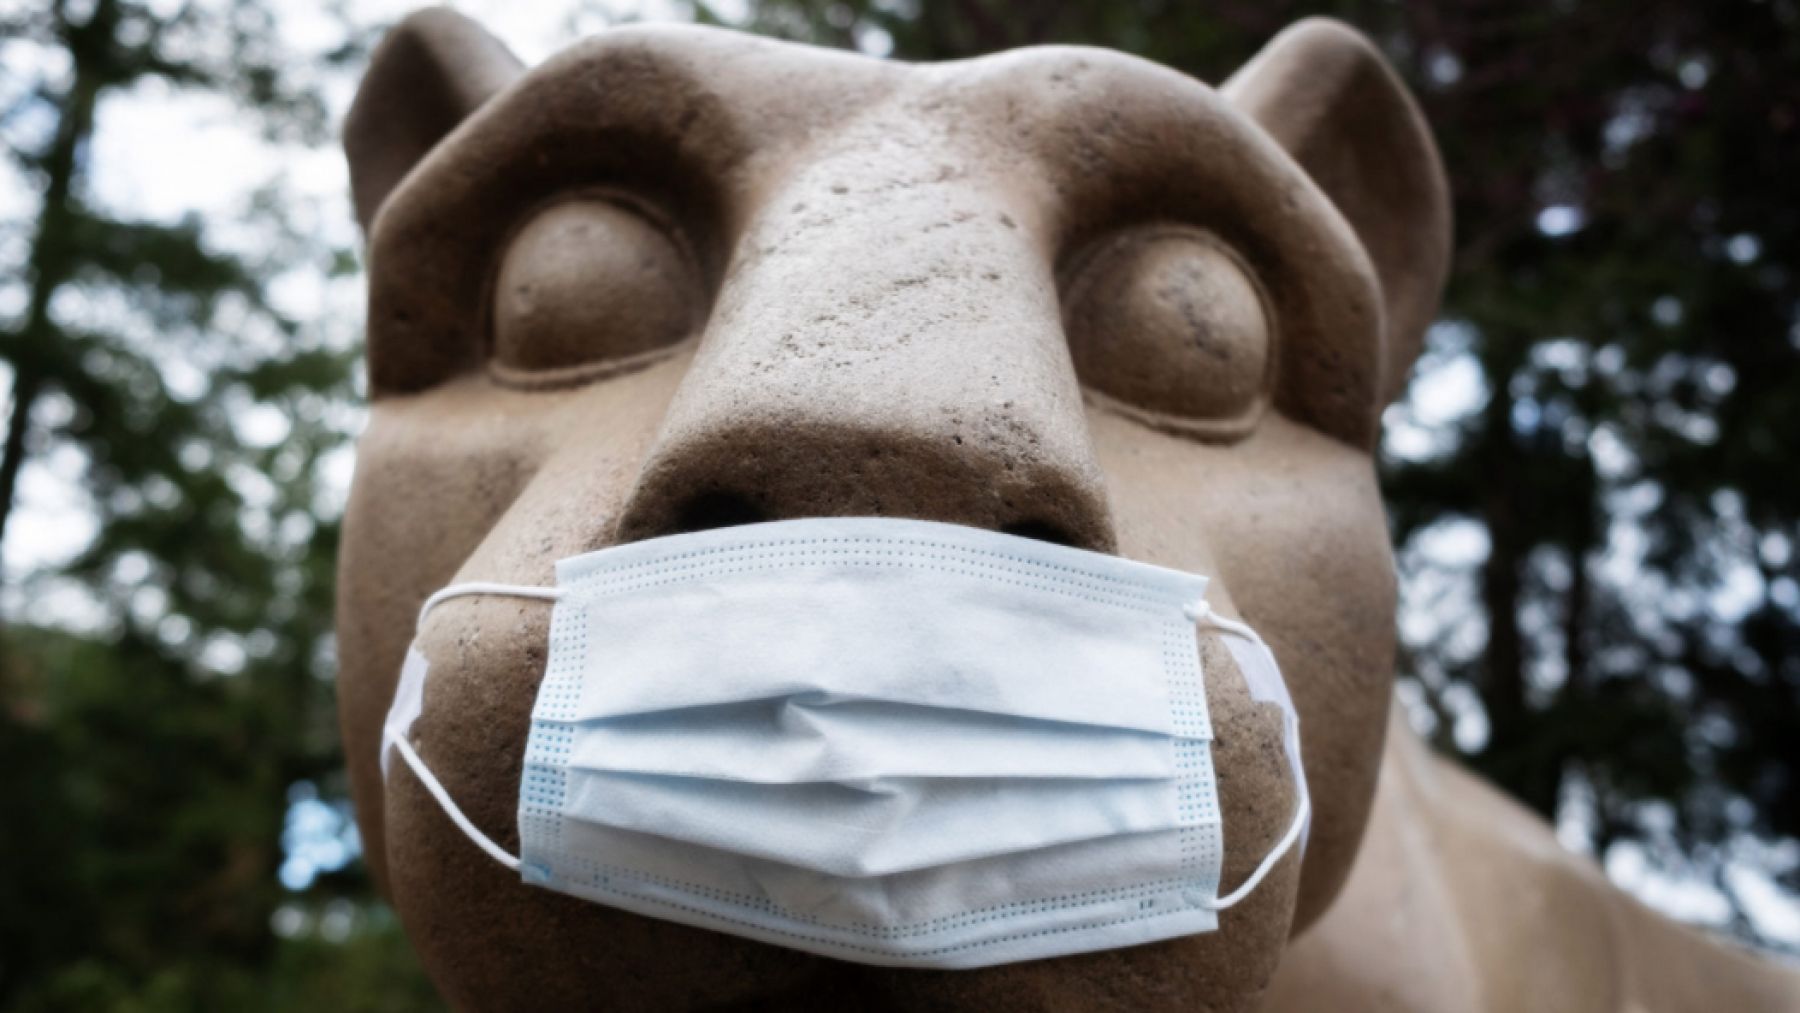 Nittany Lion shrine with a medical mask